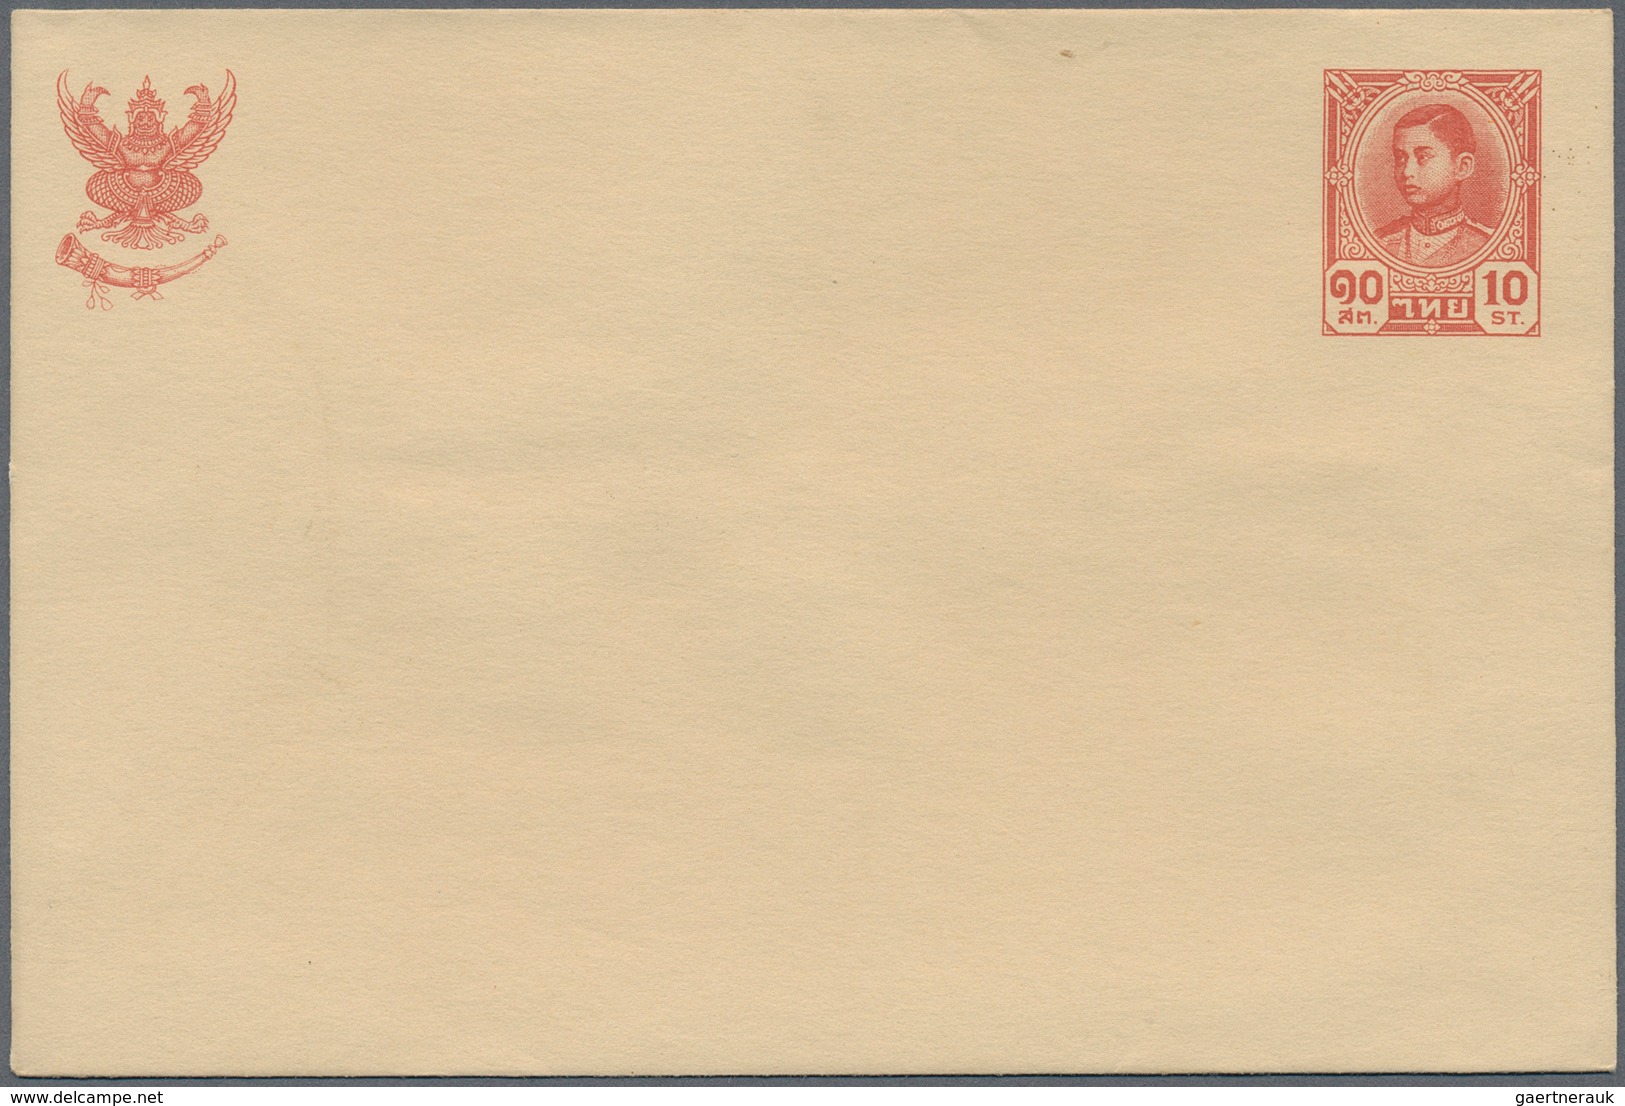 24241 Thailand - Ganzsachen: 1883-1940's: Collection/accumulation of more than 50 postal stationery items,